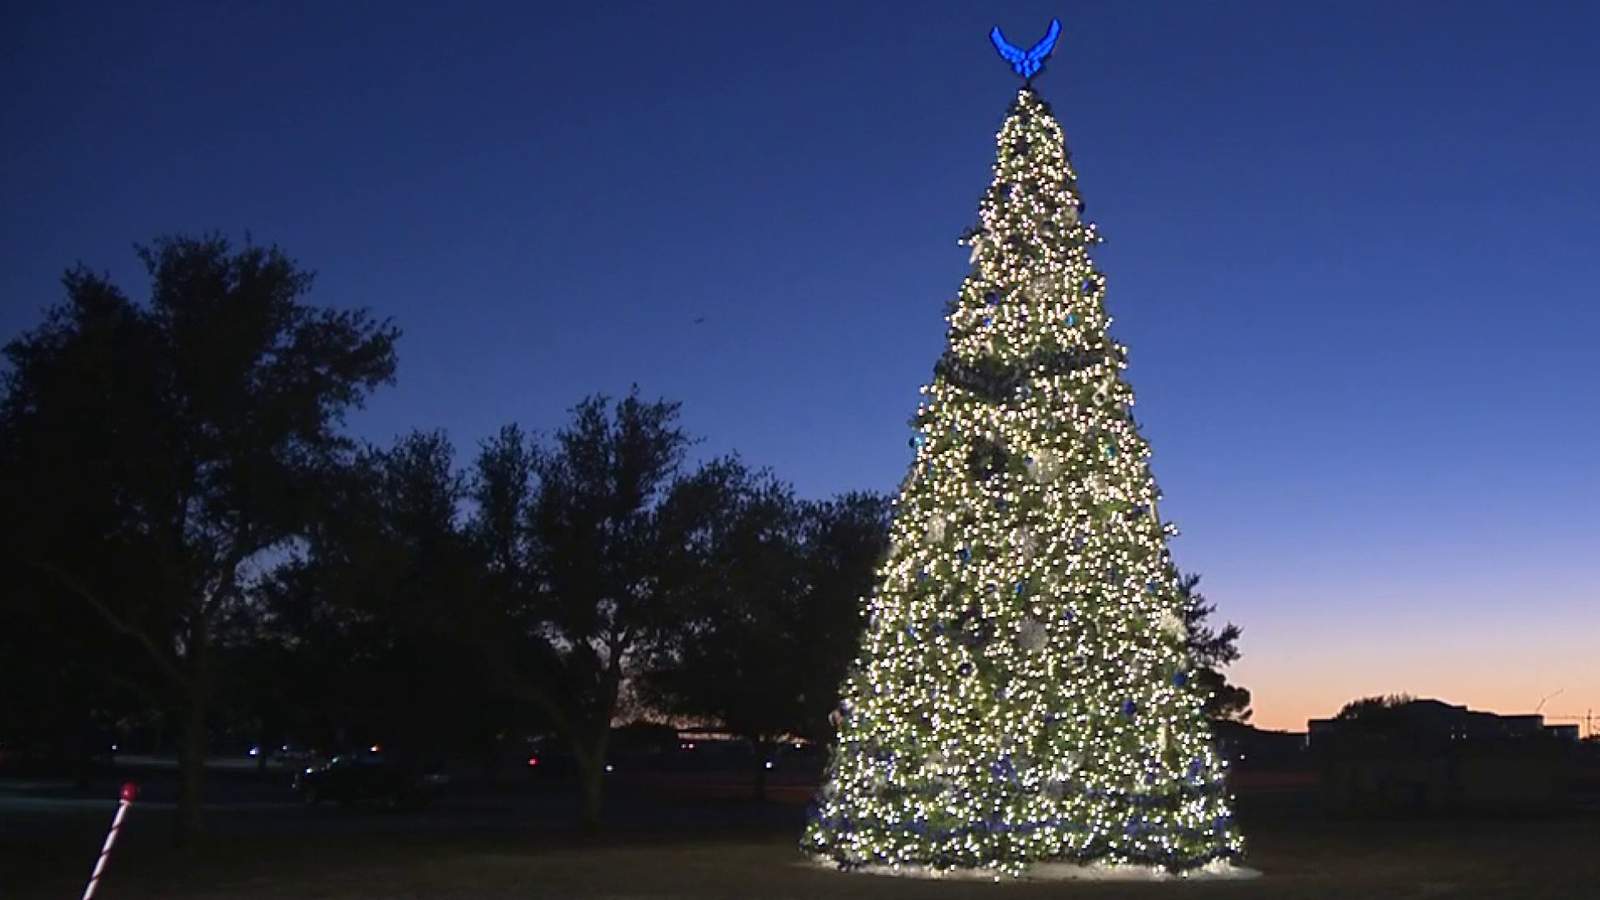 WATCH: Lackland Air Force base kicks off tree lighting ceremony, the first of several holiday celebrations